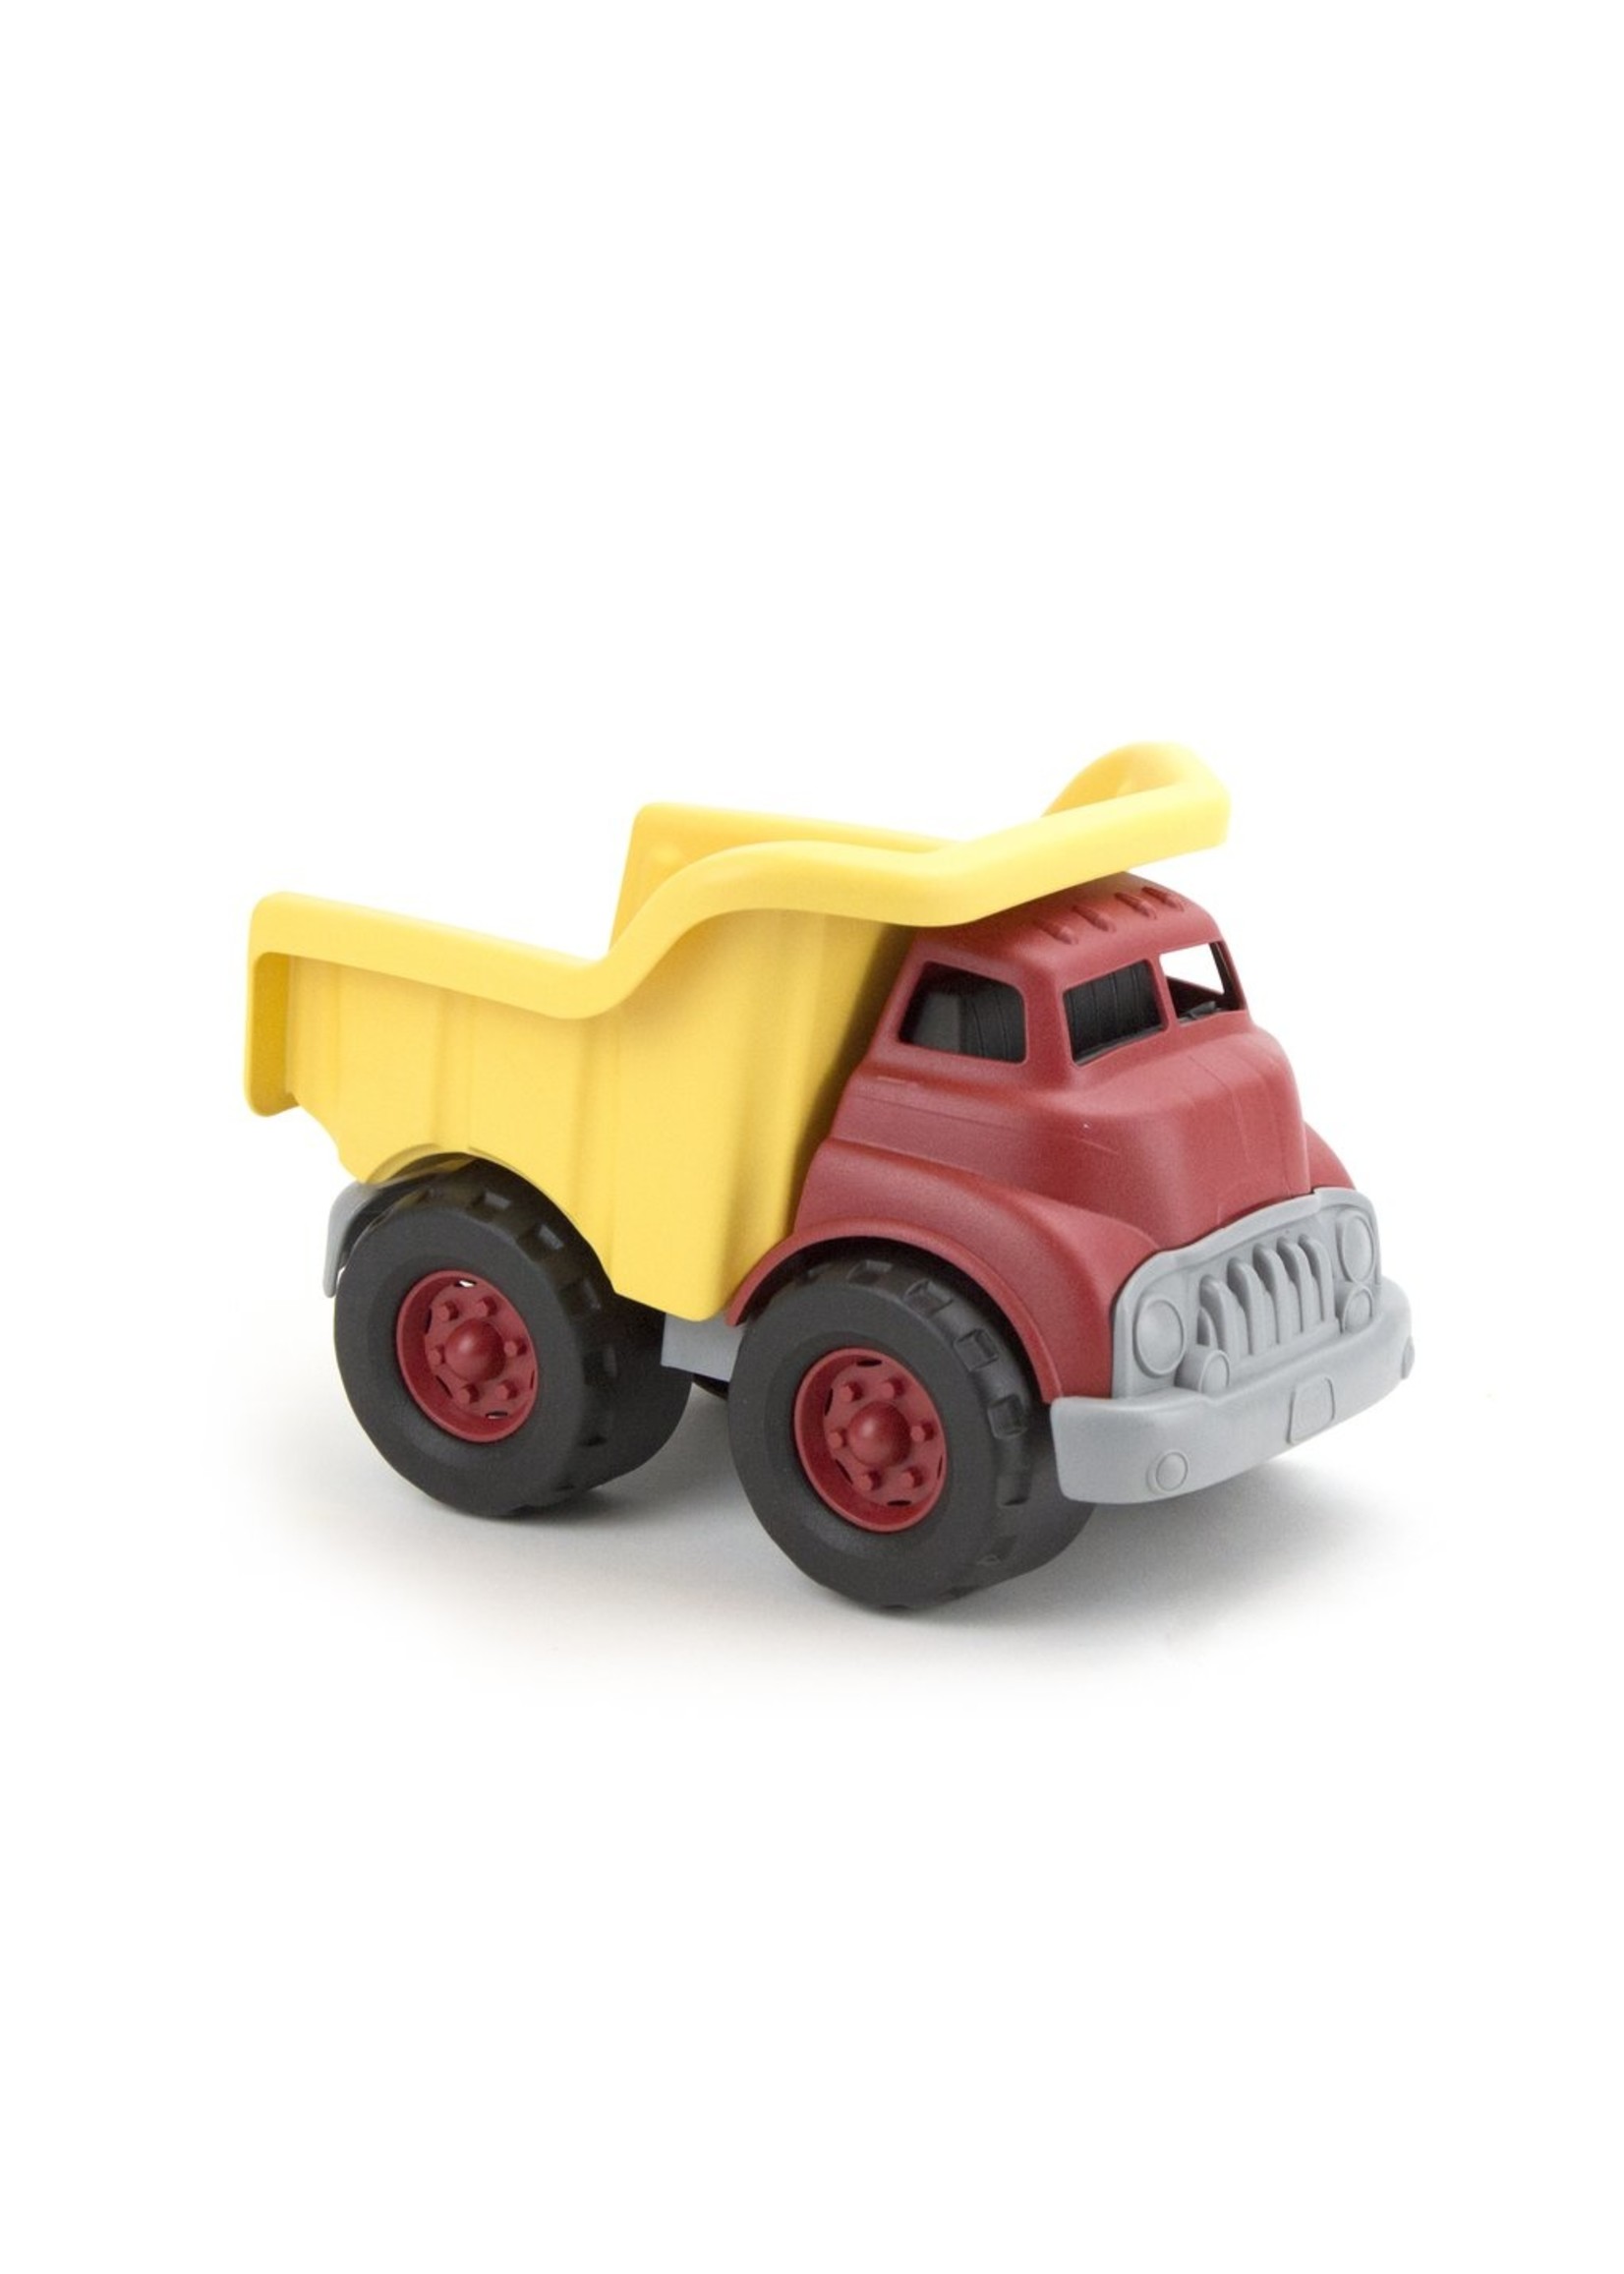 Green toys Camion Benne Rouge et jaune